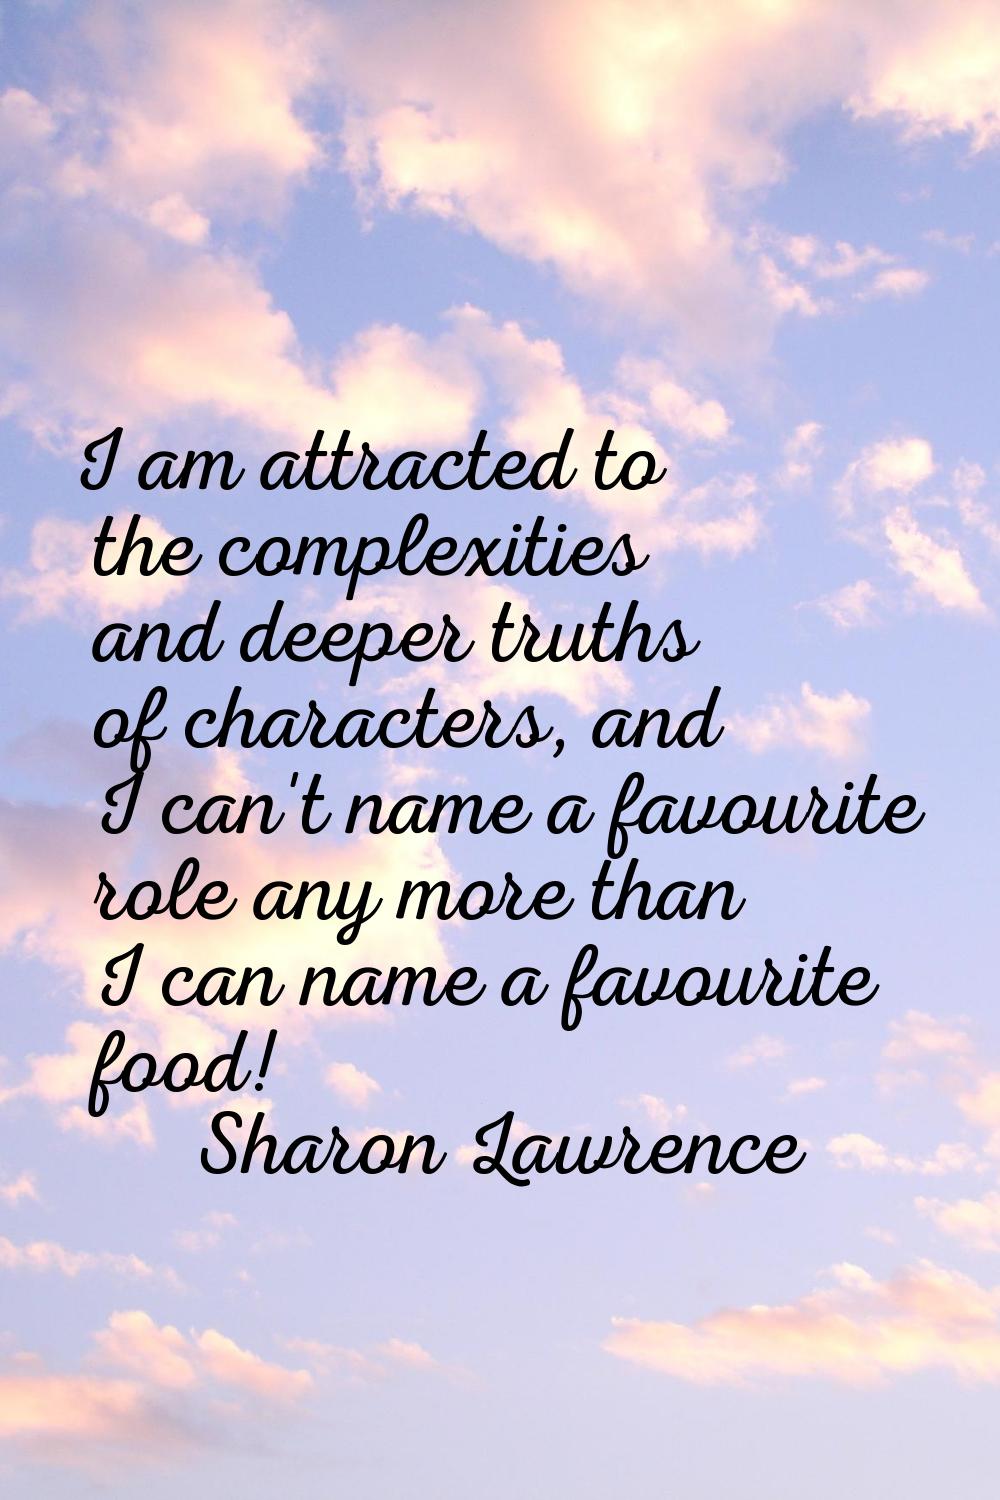 I am attracted to the complexities and deeper truths of characters, and I can't name a favourite ro